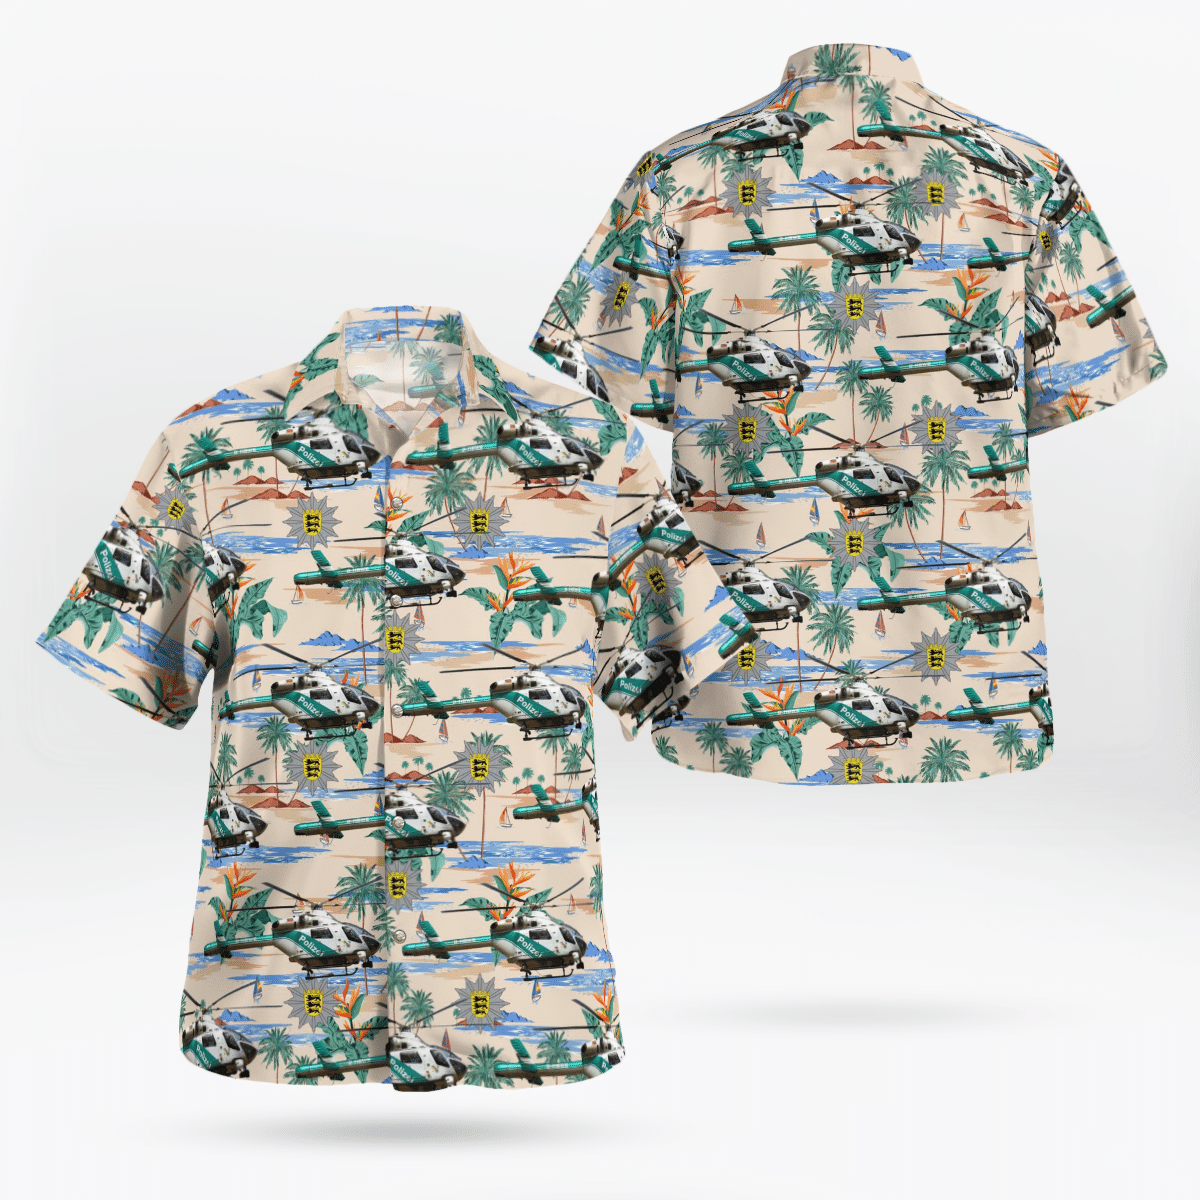 If you are in need of a new summertime look, pick up this Hawaiian shirt 194